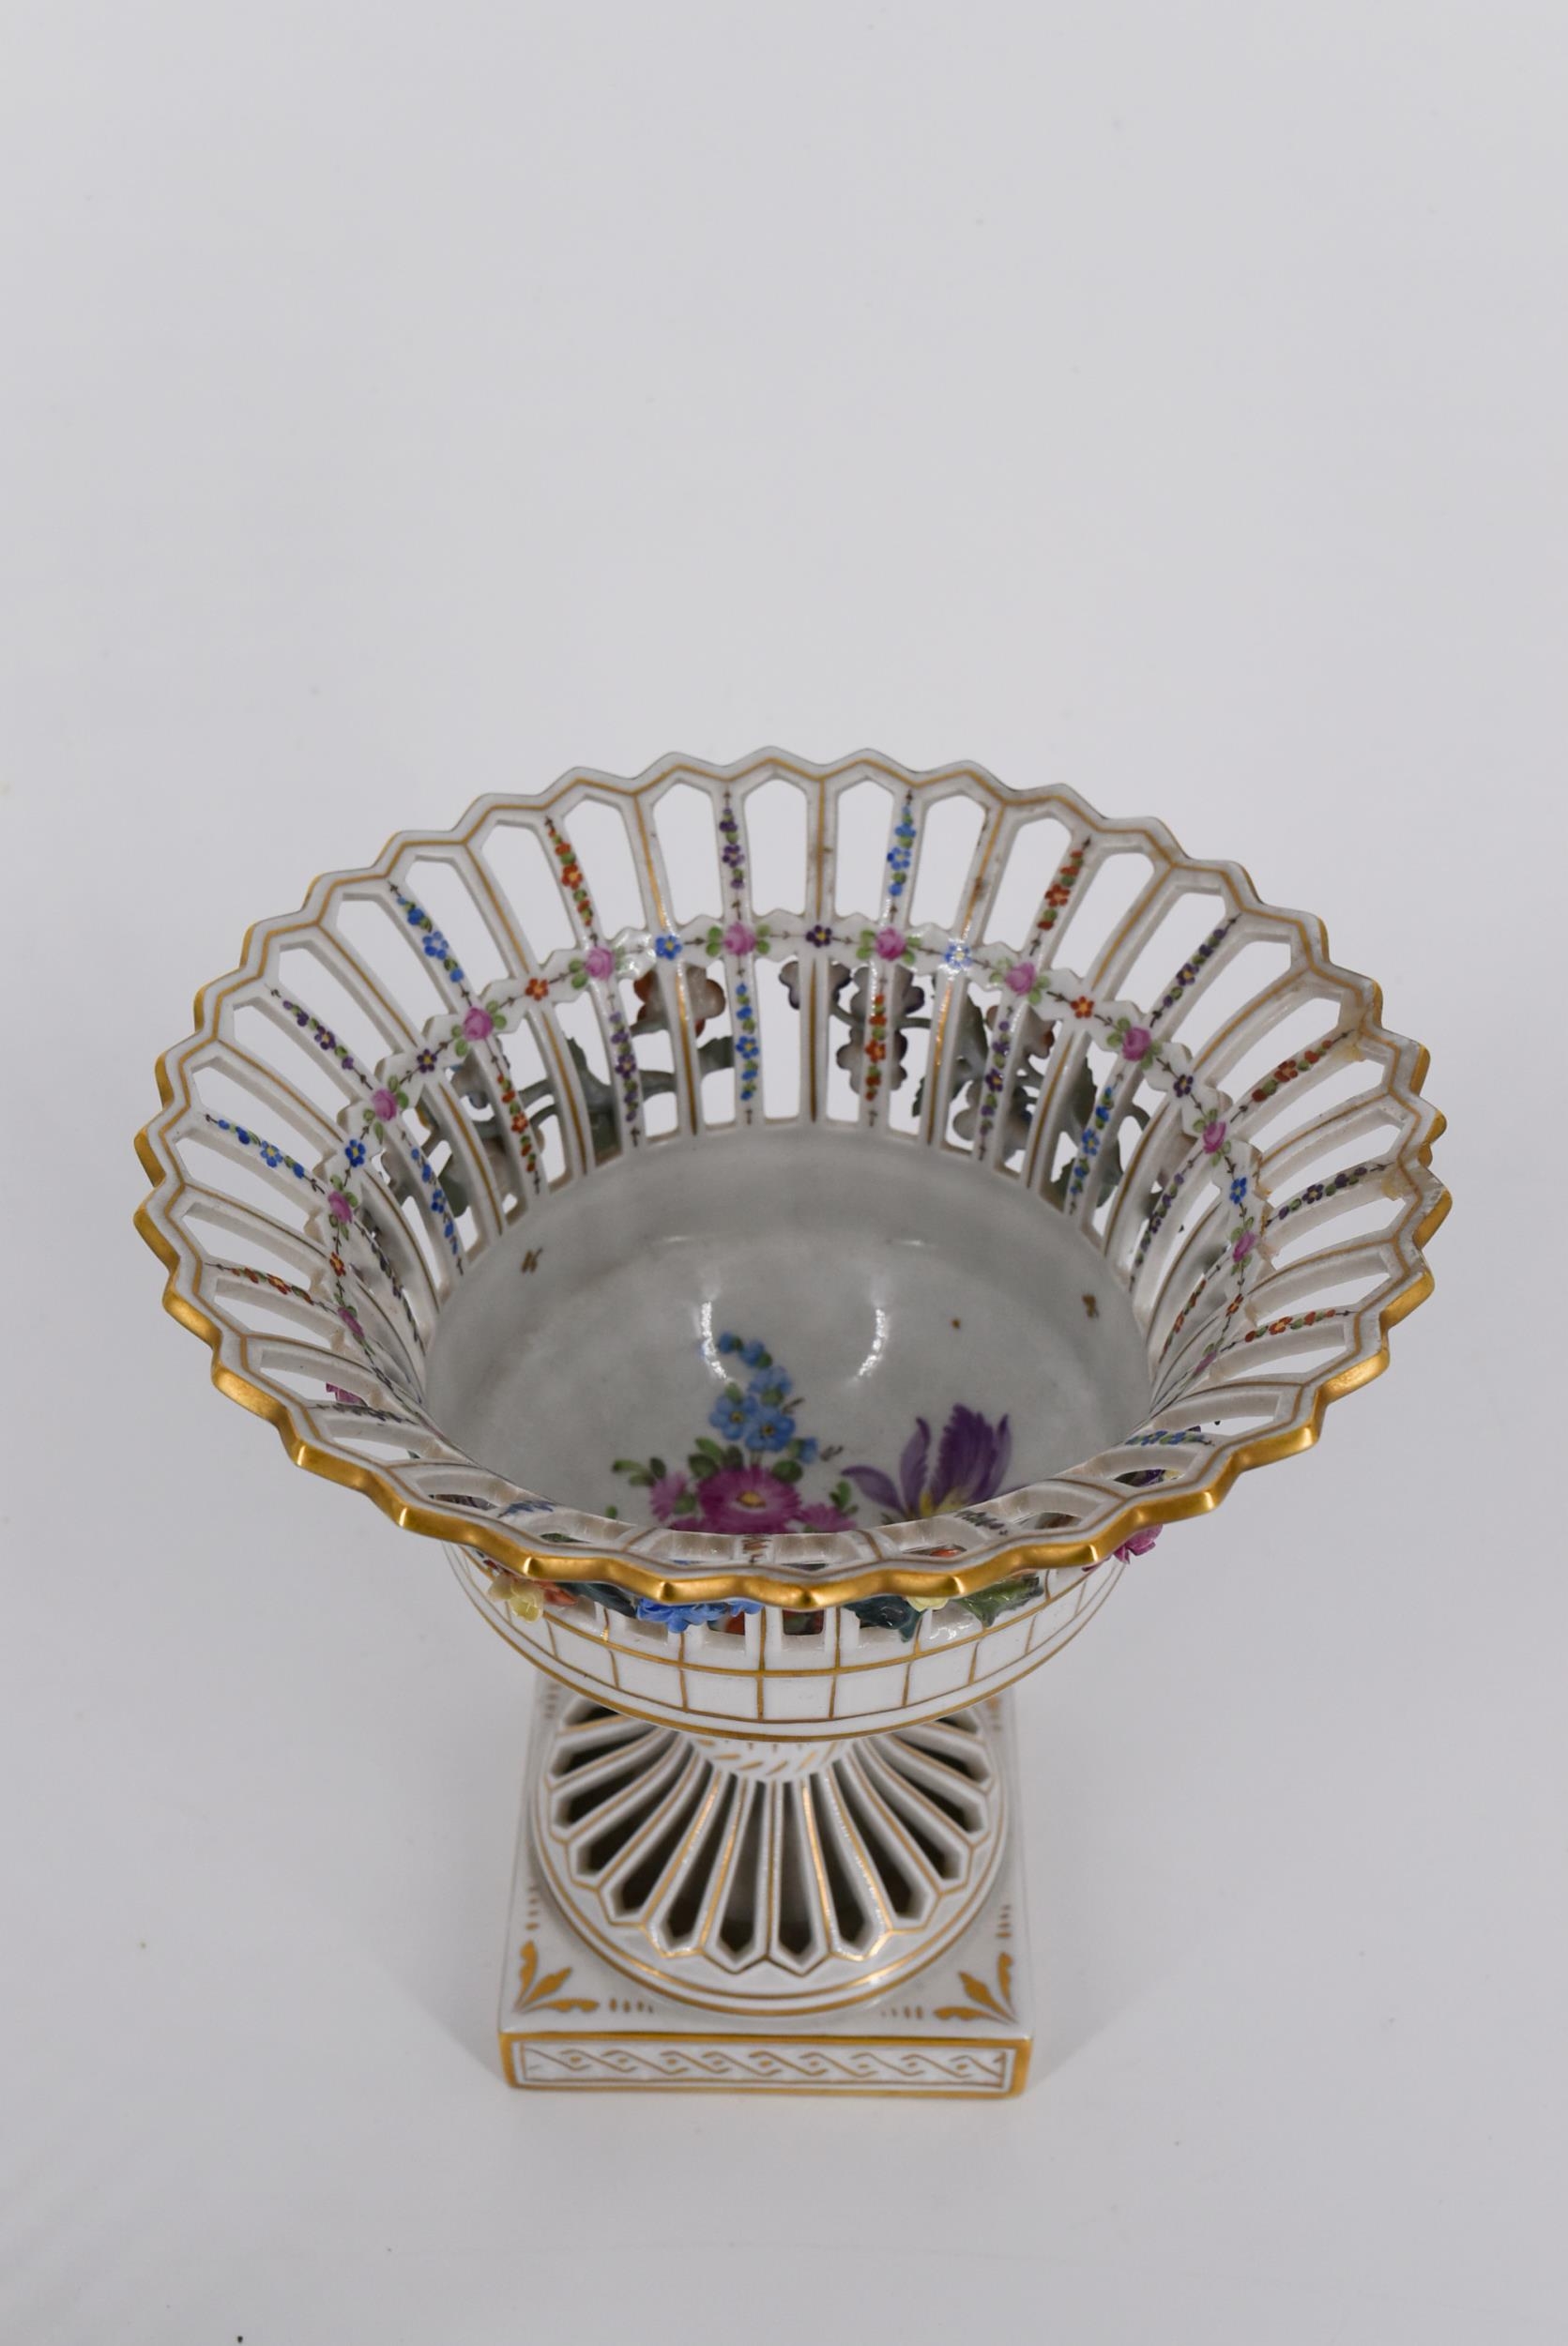 A 20th century Dresden porcelain comport, with a pierced and flared rim, encrusted with flowers, - Image 3 of 8